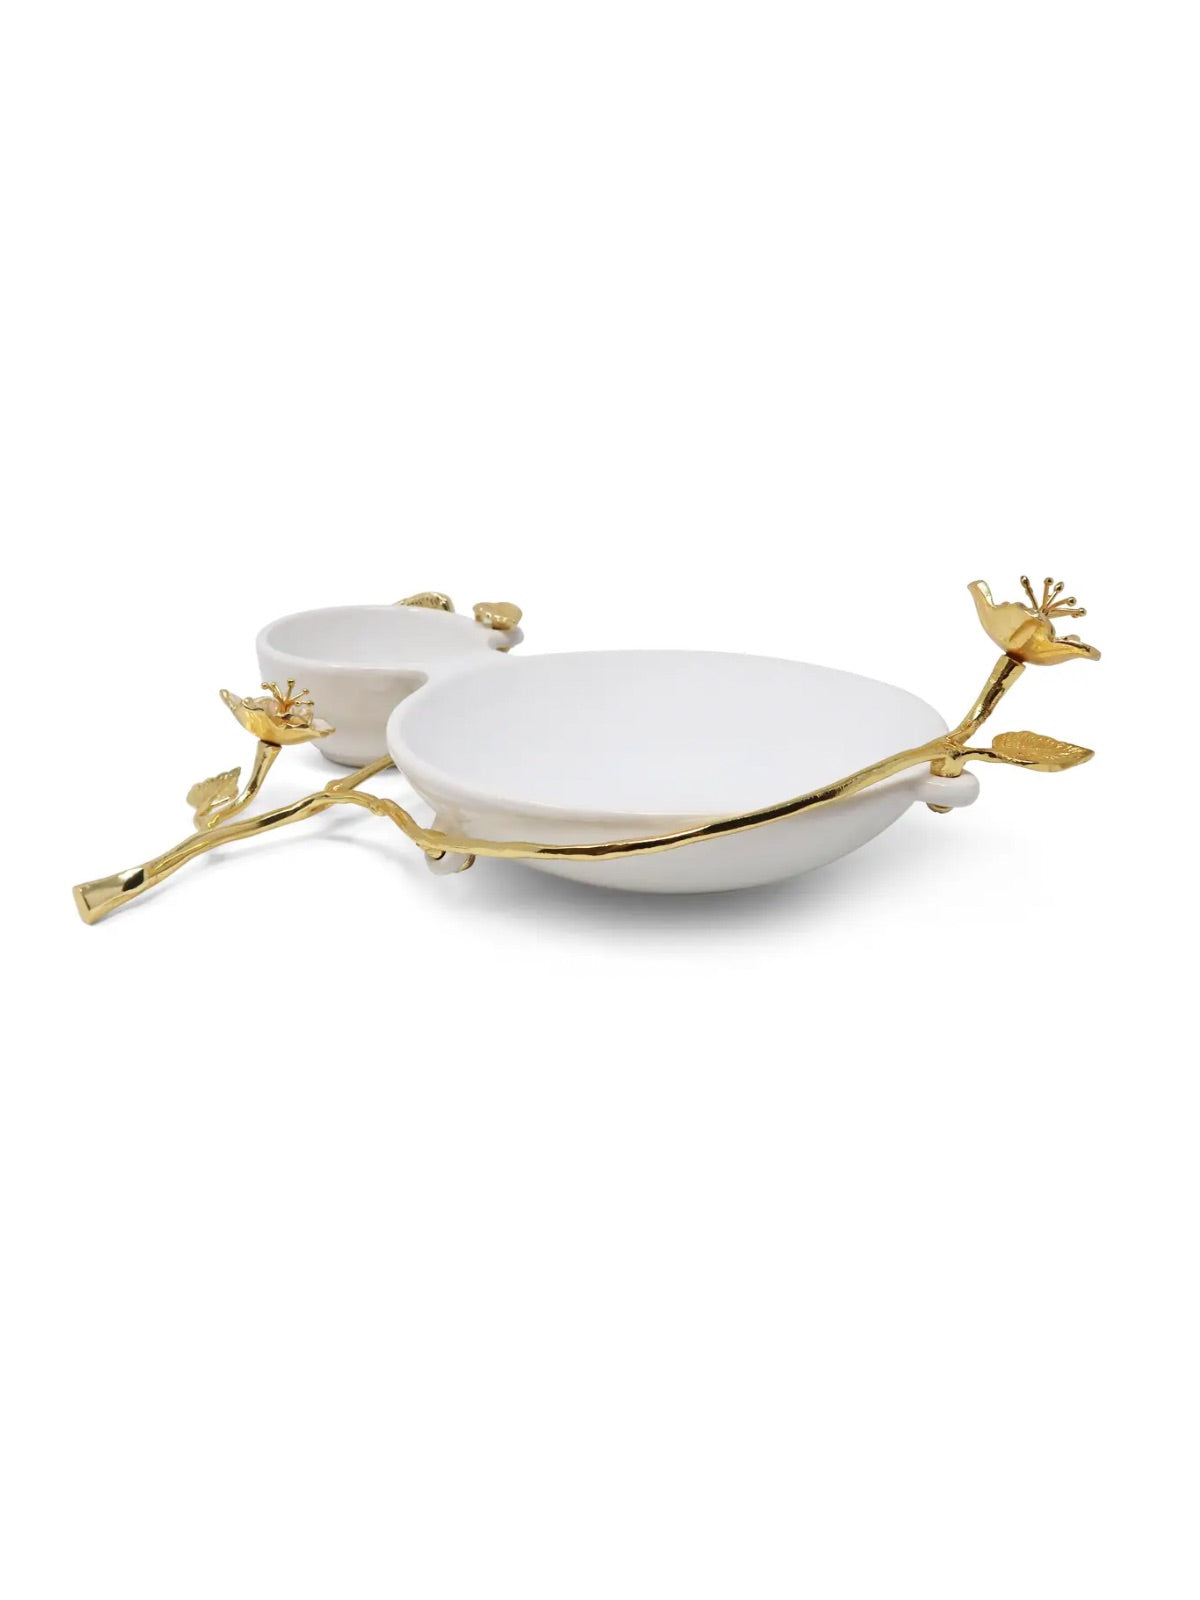 Two-Section Porcelain Tray with Elegant Gold Flower Detail